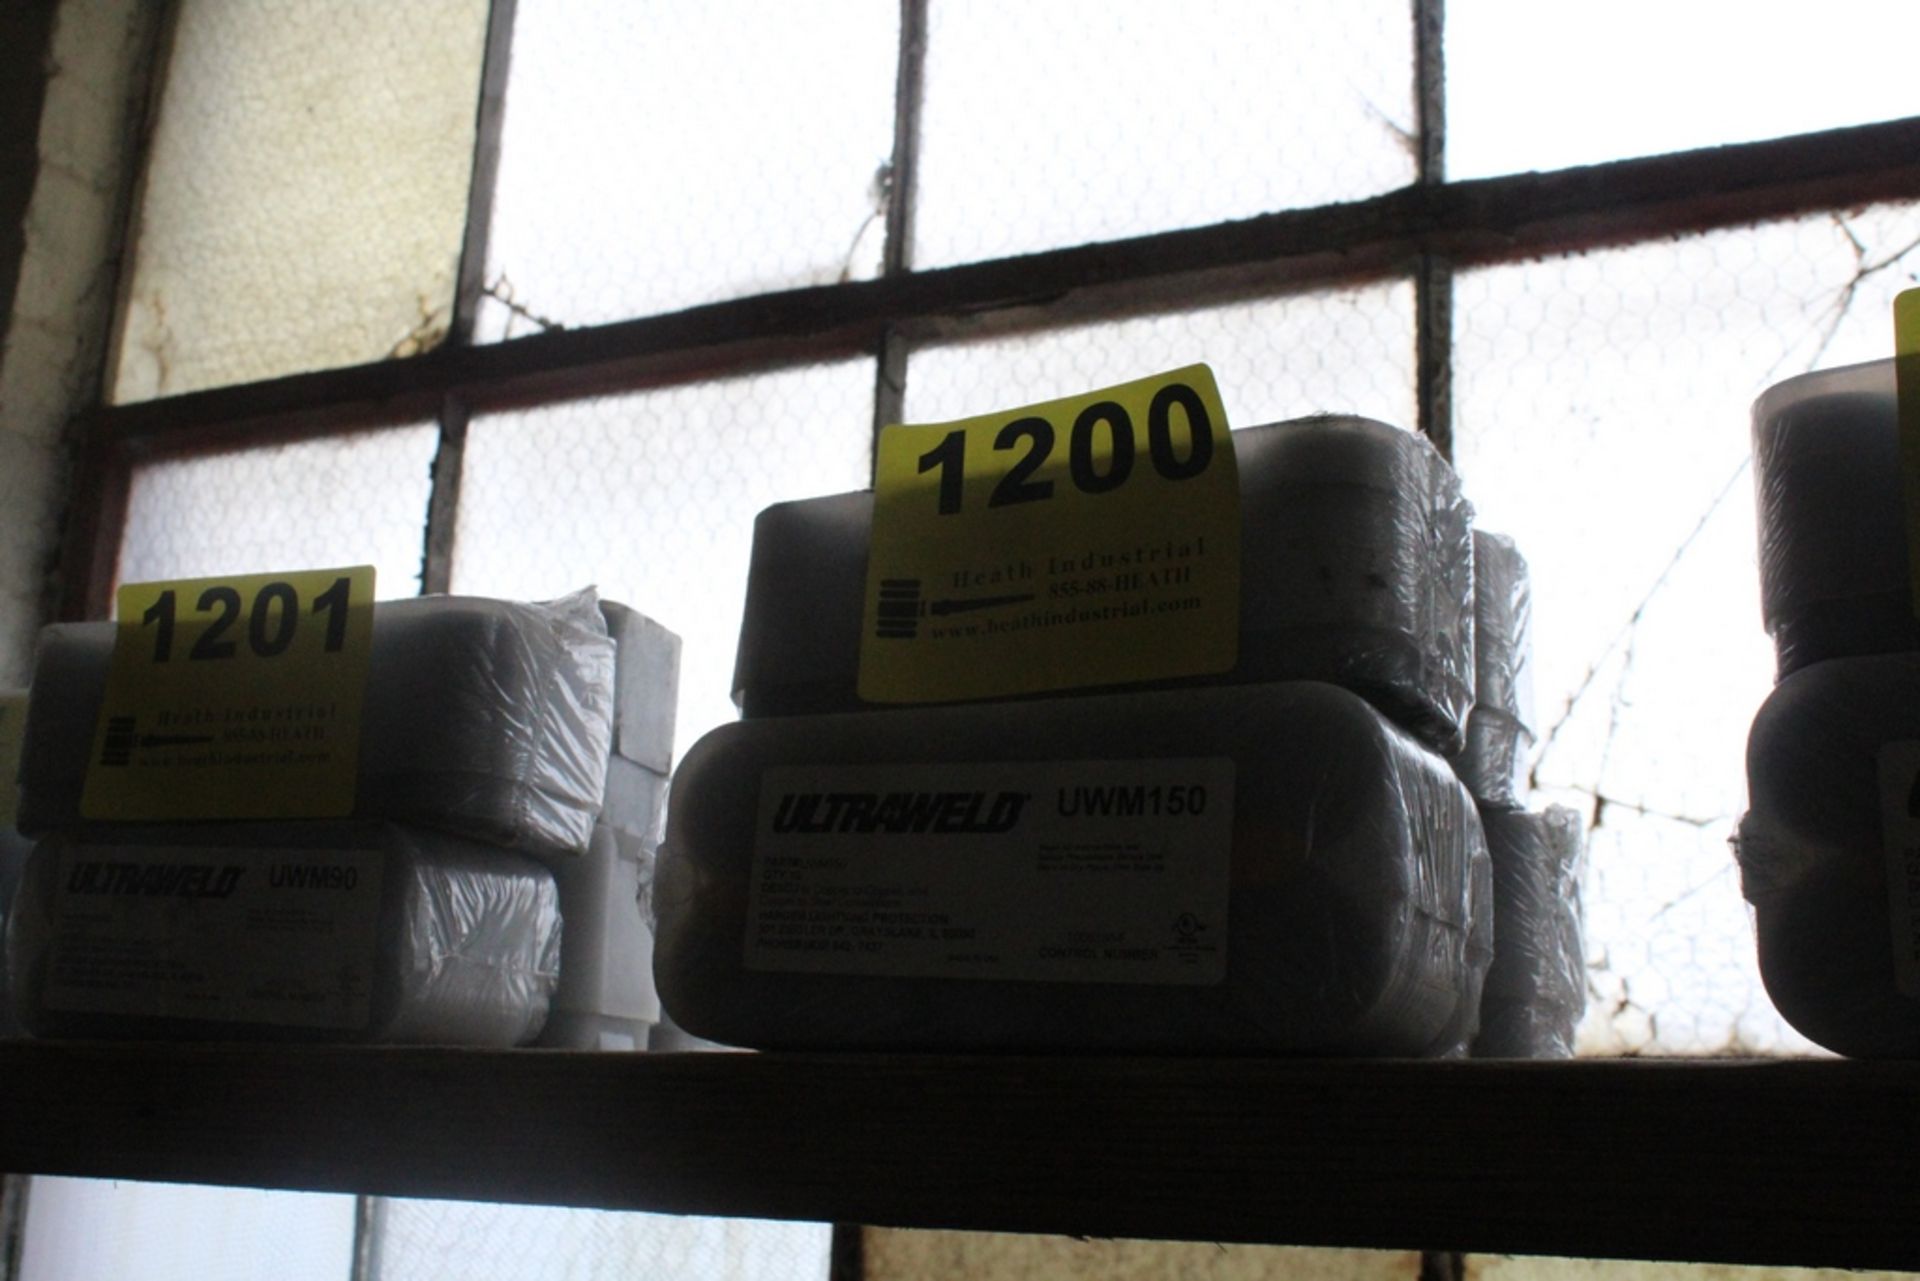 (5) CONTAINERS OF CADWELD WELDING MATERIAL